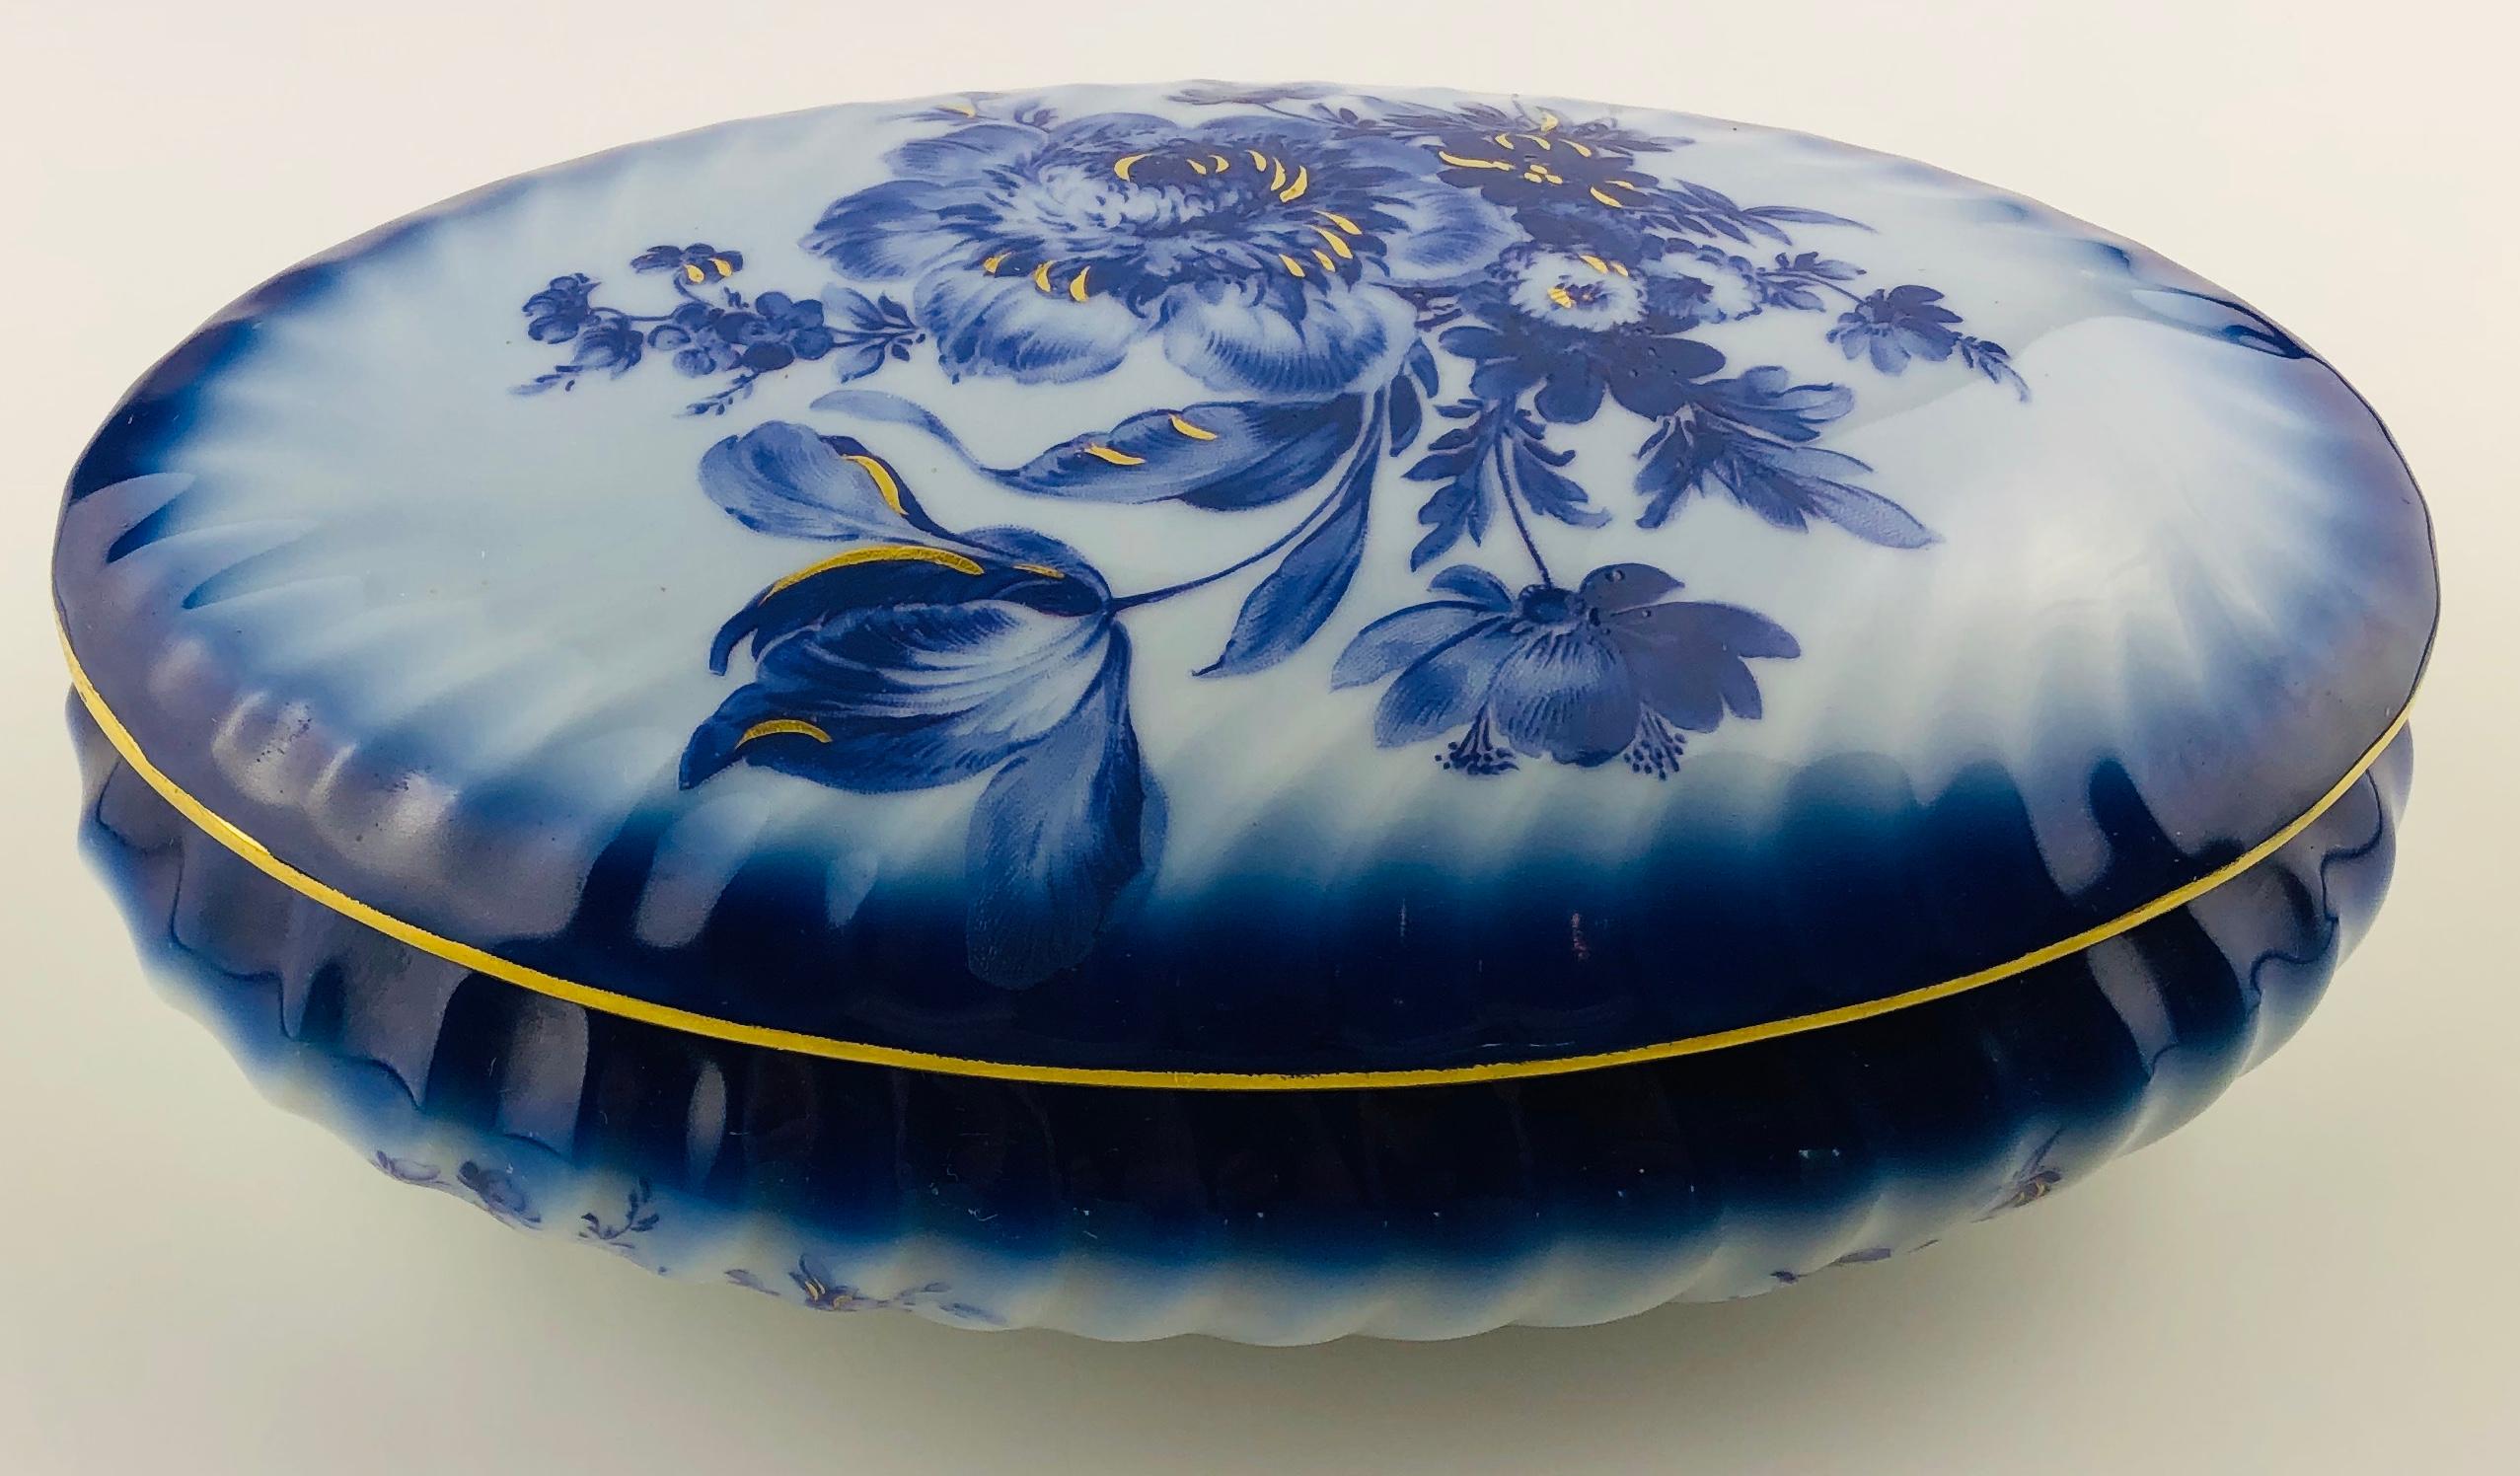 Beautiful blue and white Limoges handcrafted and hand painted gold trimmed trinket, jewelry box or candy dish, circa 1930. 
Signed Tharaud, Limoges.

This Limoges trinket box or candy dish signed Camille Tharaud, France is very good quality